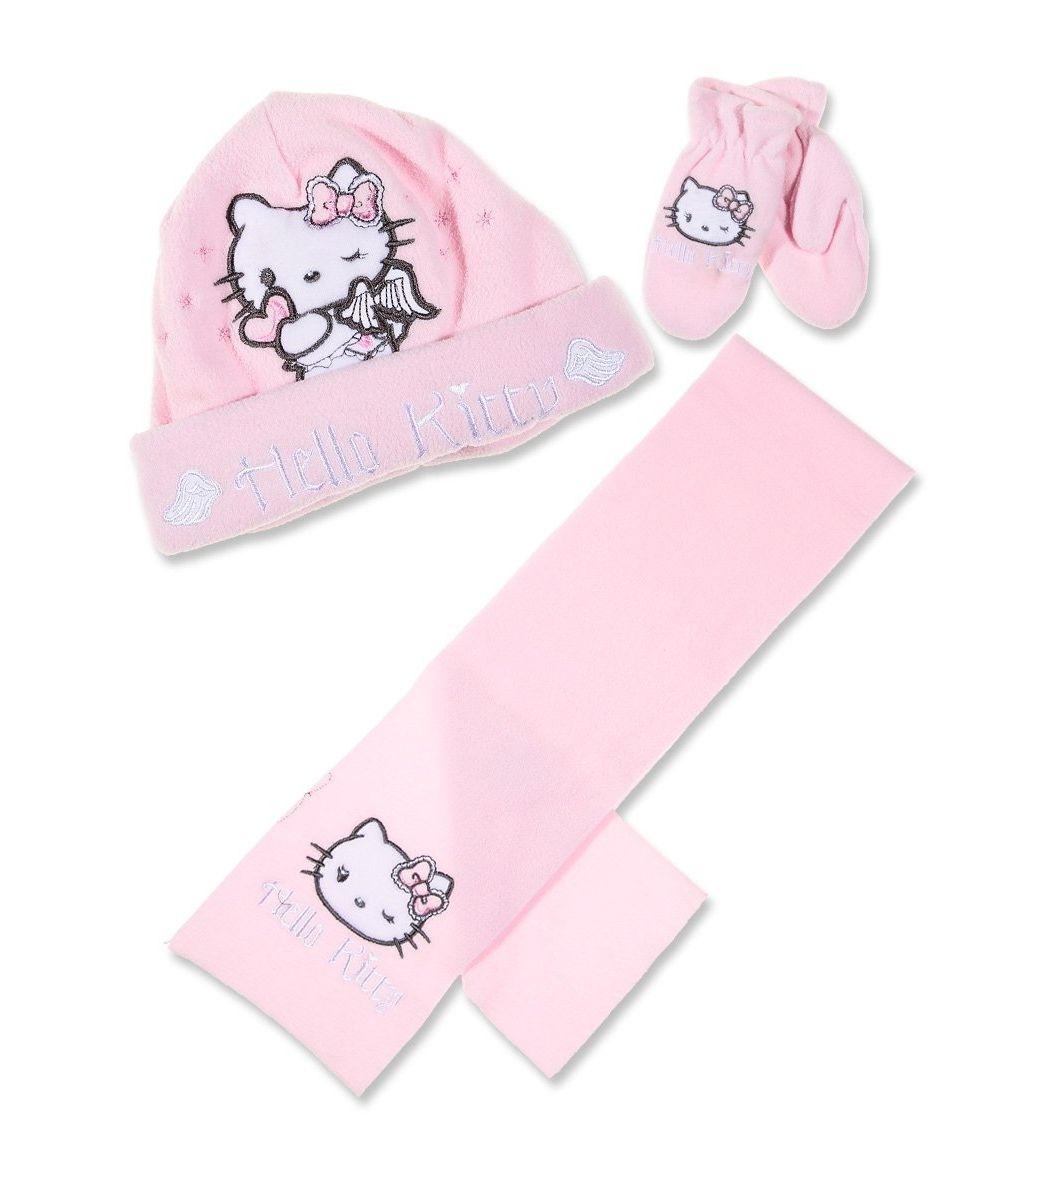 Hello Kitty Set, hat, pair of gloves and a scarf, pink